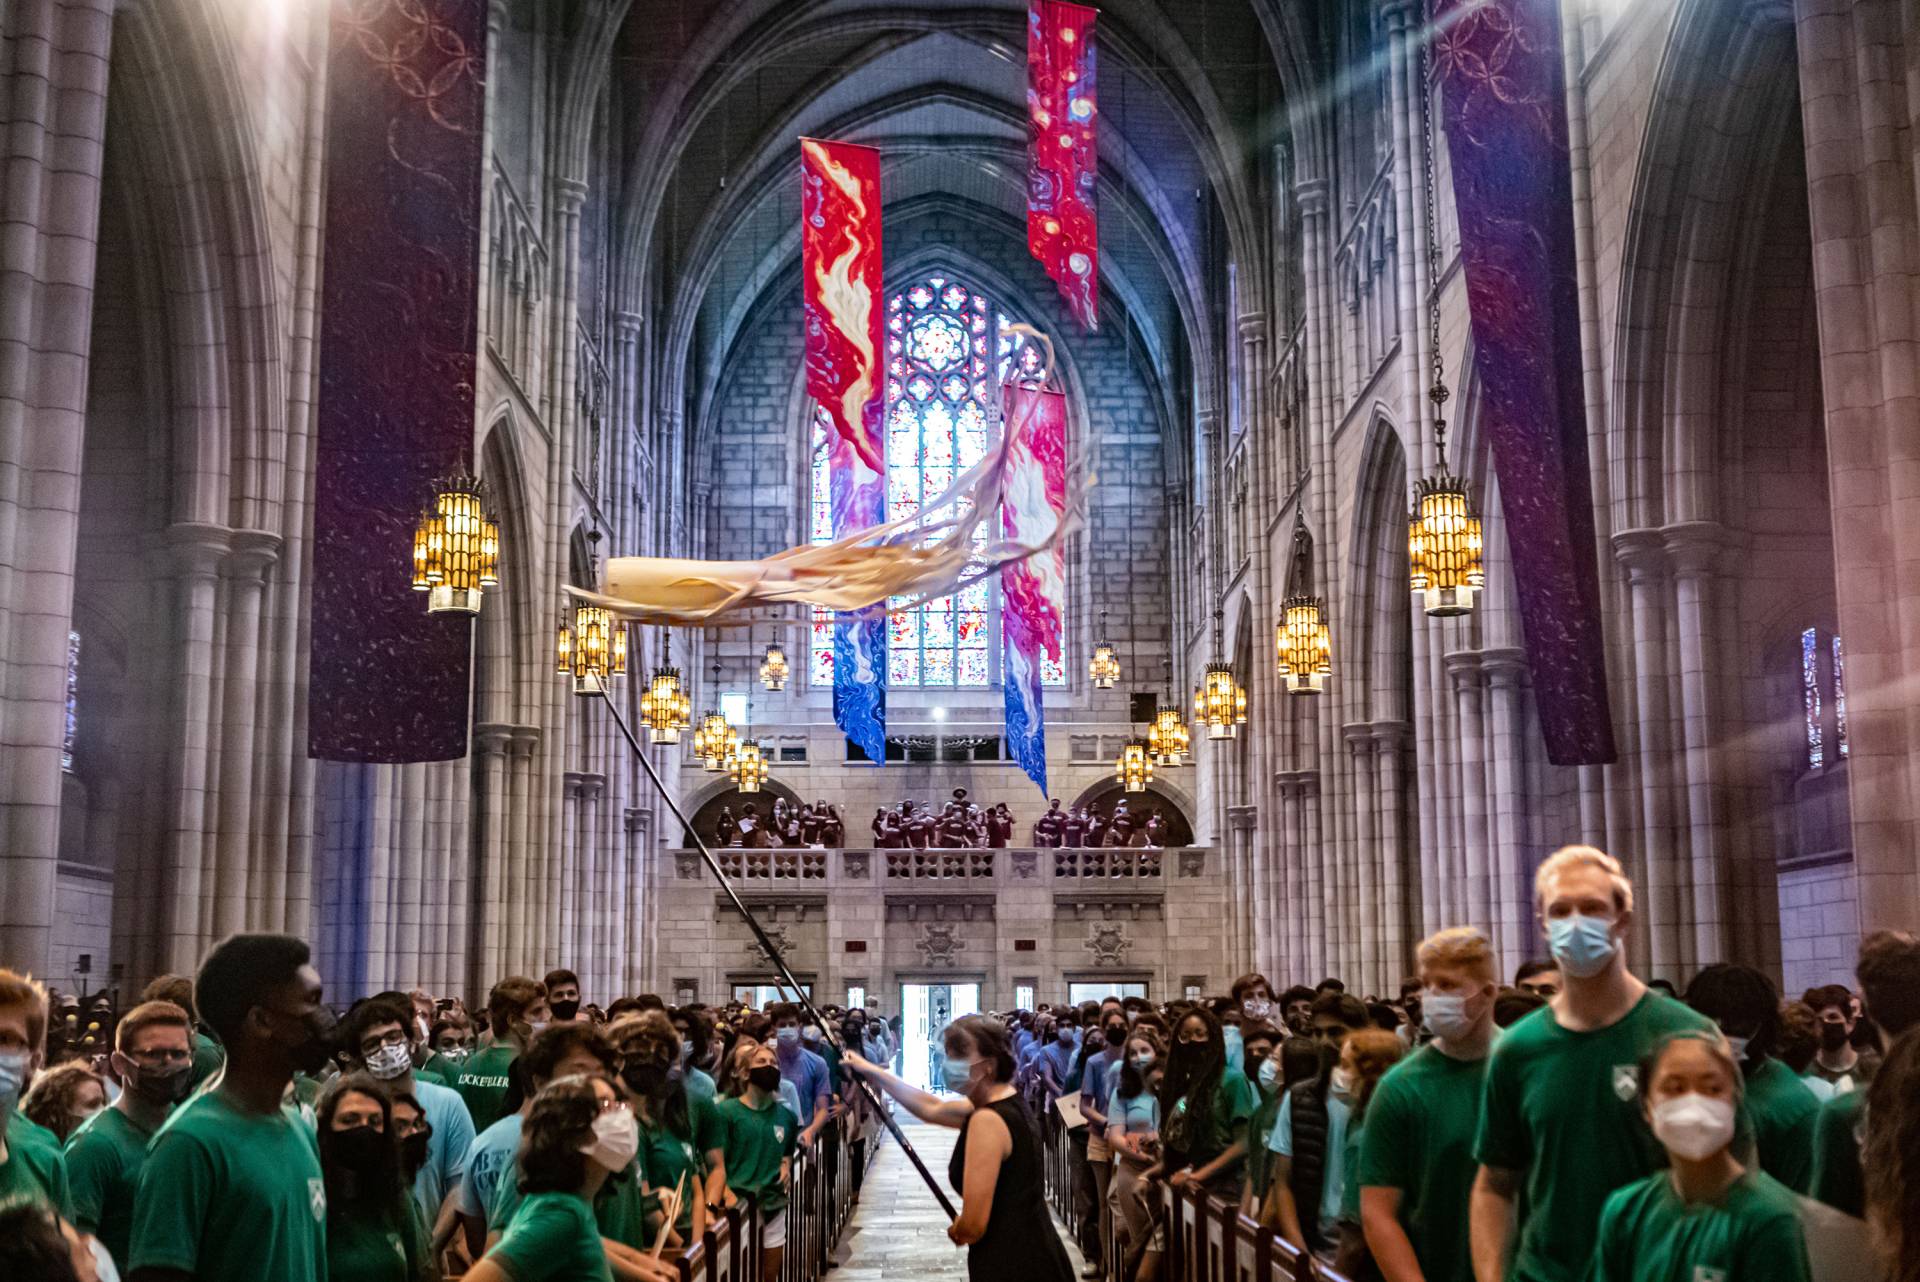 Opening Exercises in the Princeton University Chapel